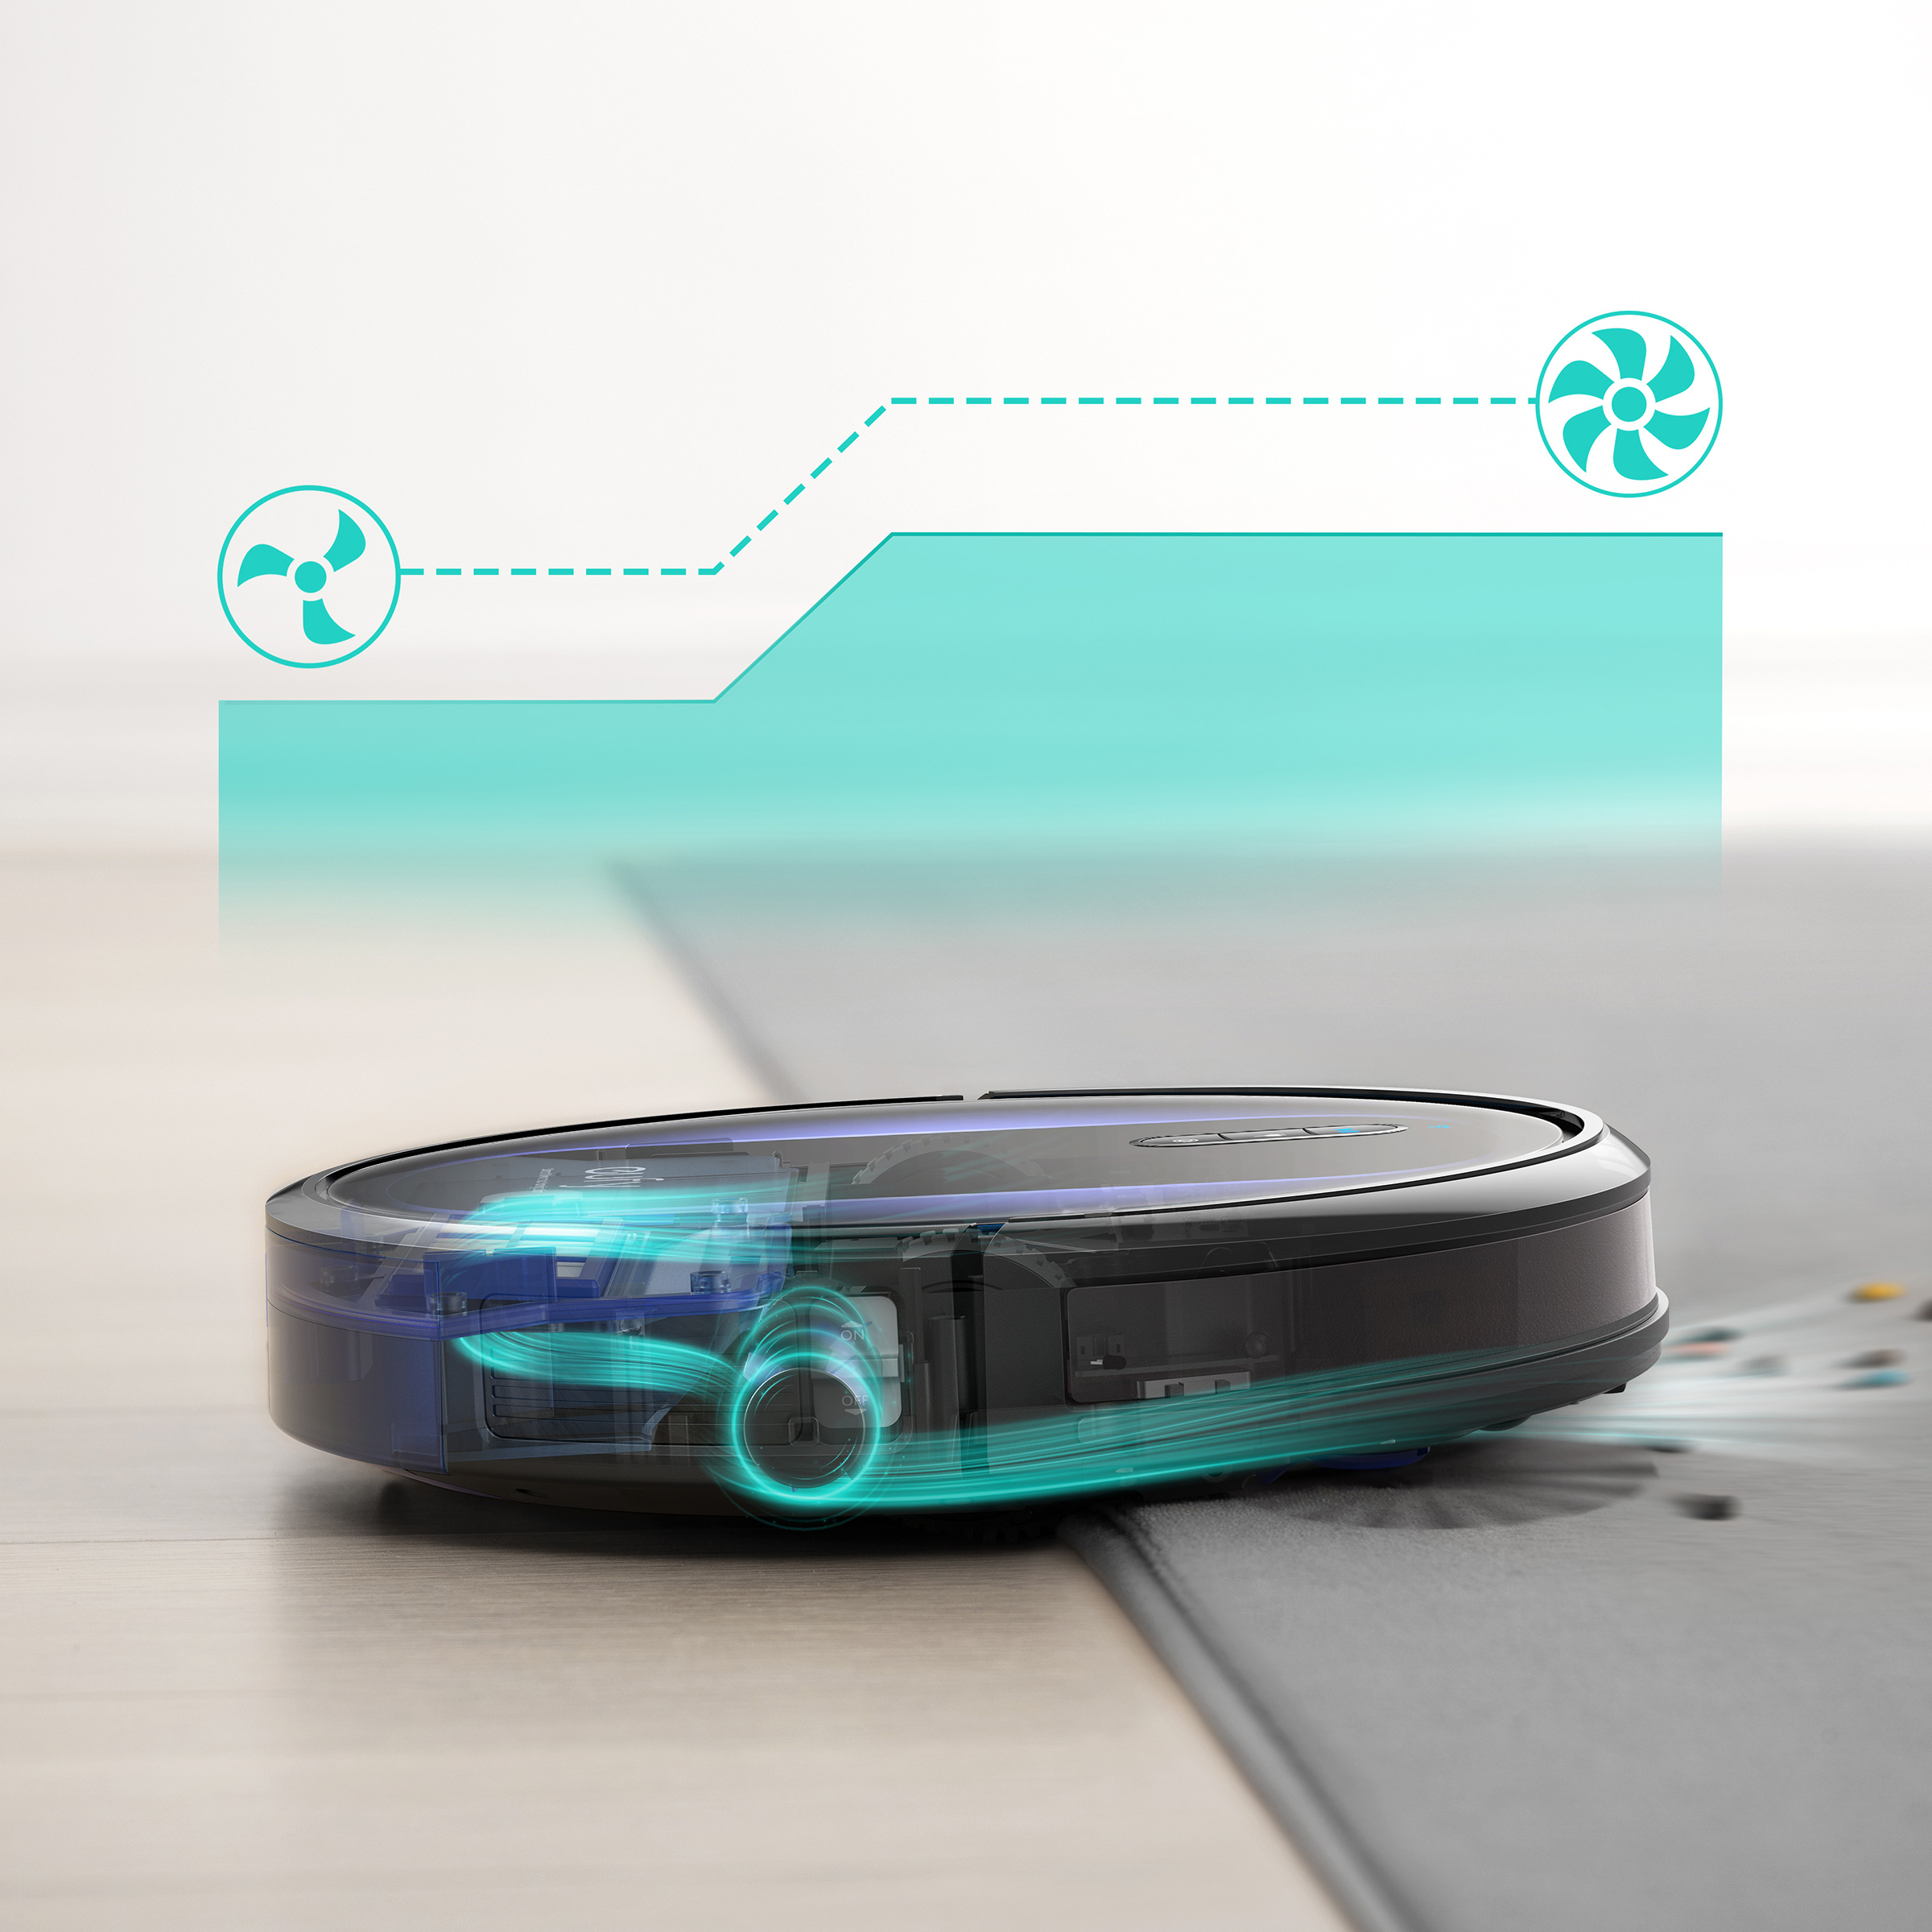 eufy Clean by Anker RoboVac G32 Pro Robot Vacuum with Home Mapping, 2000 Pa Strong Suction, Wi-Fi enabled, Ideal for Carpets, Hardwood Floors, and Pet Owners, Supports Only 2.4Ghz Wi-Fi - image 11 of 15